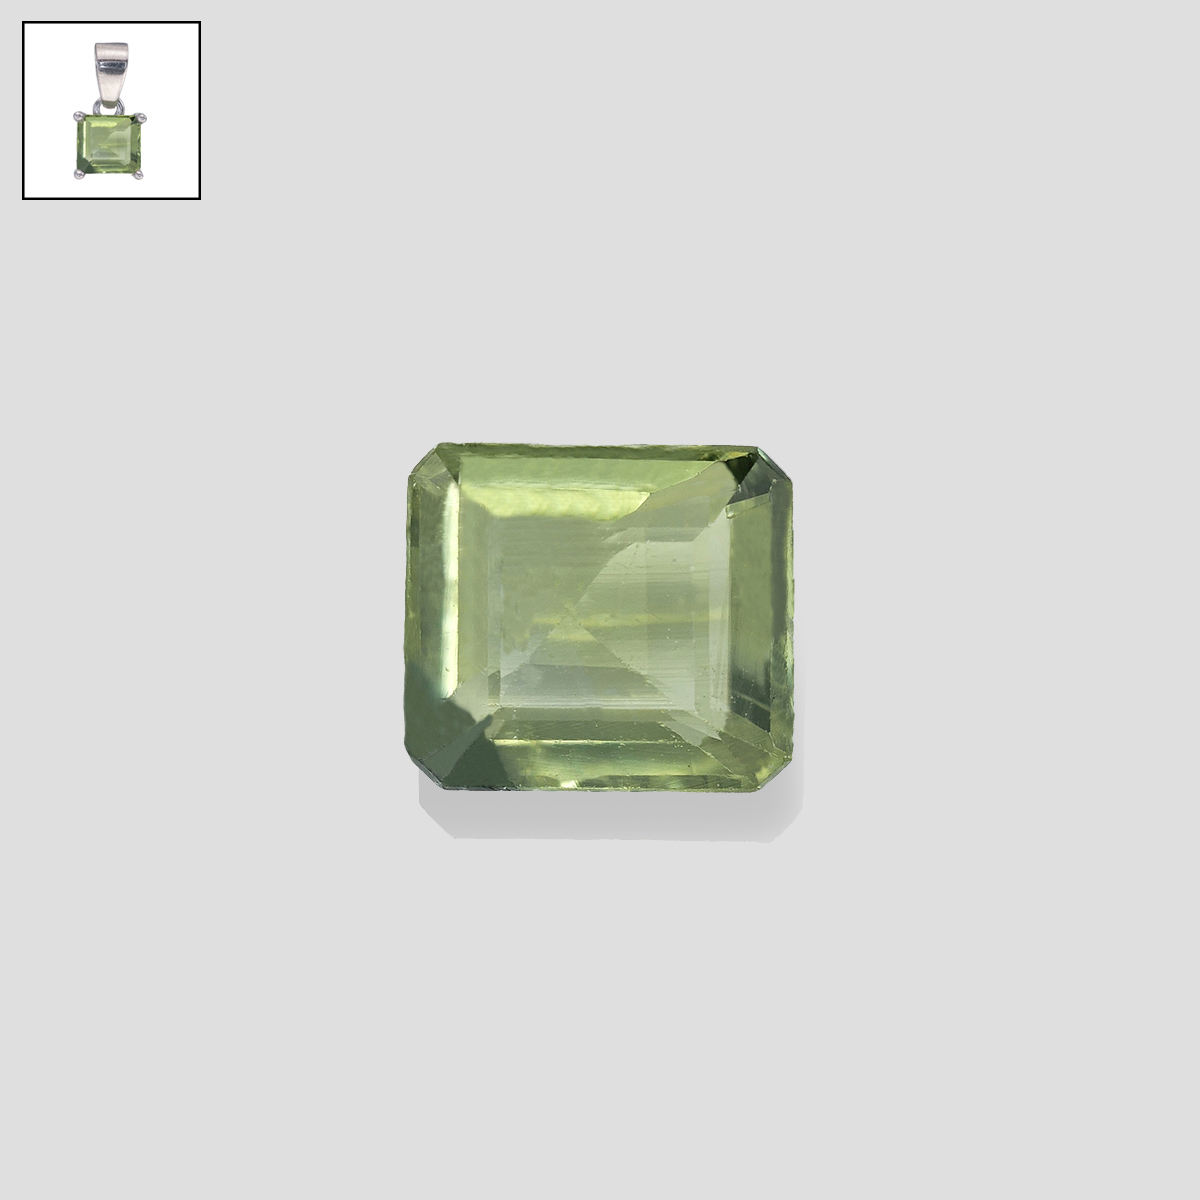 (do)((IMAGE ANSAR & pendant)) ))Green Olive green, big face perf